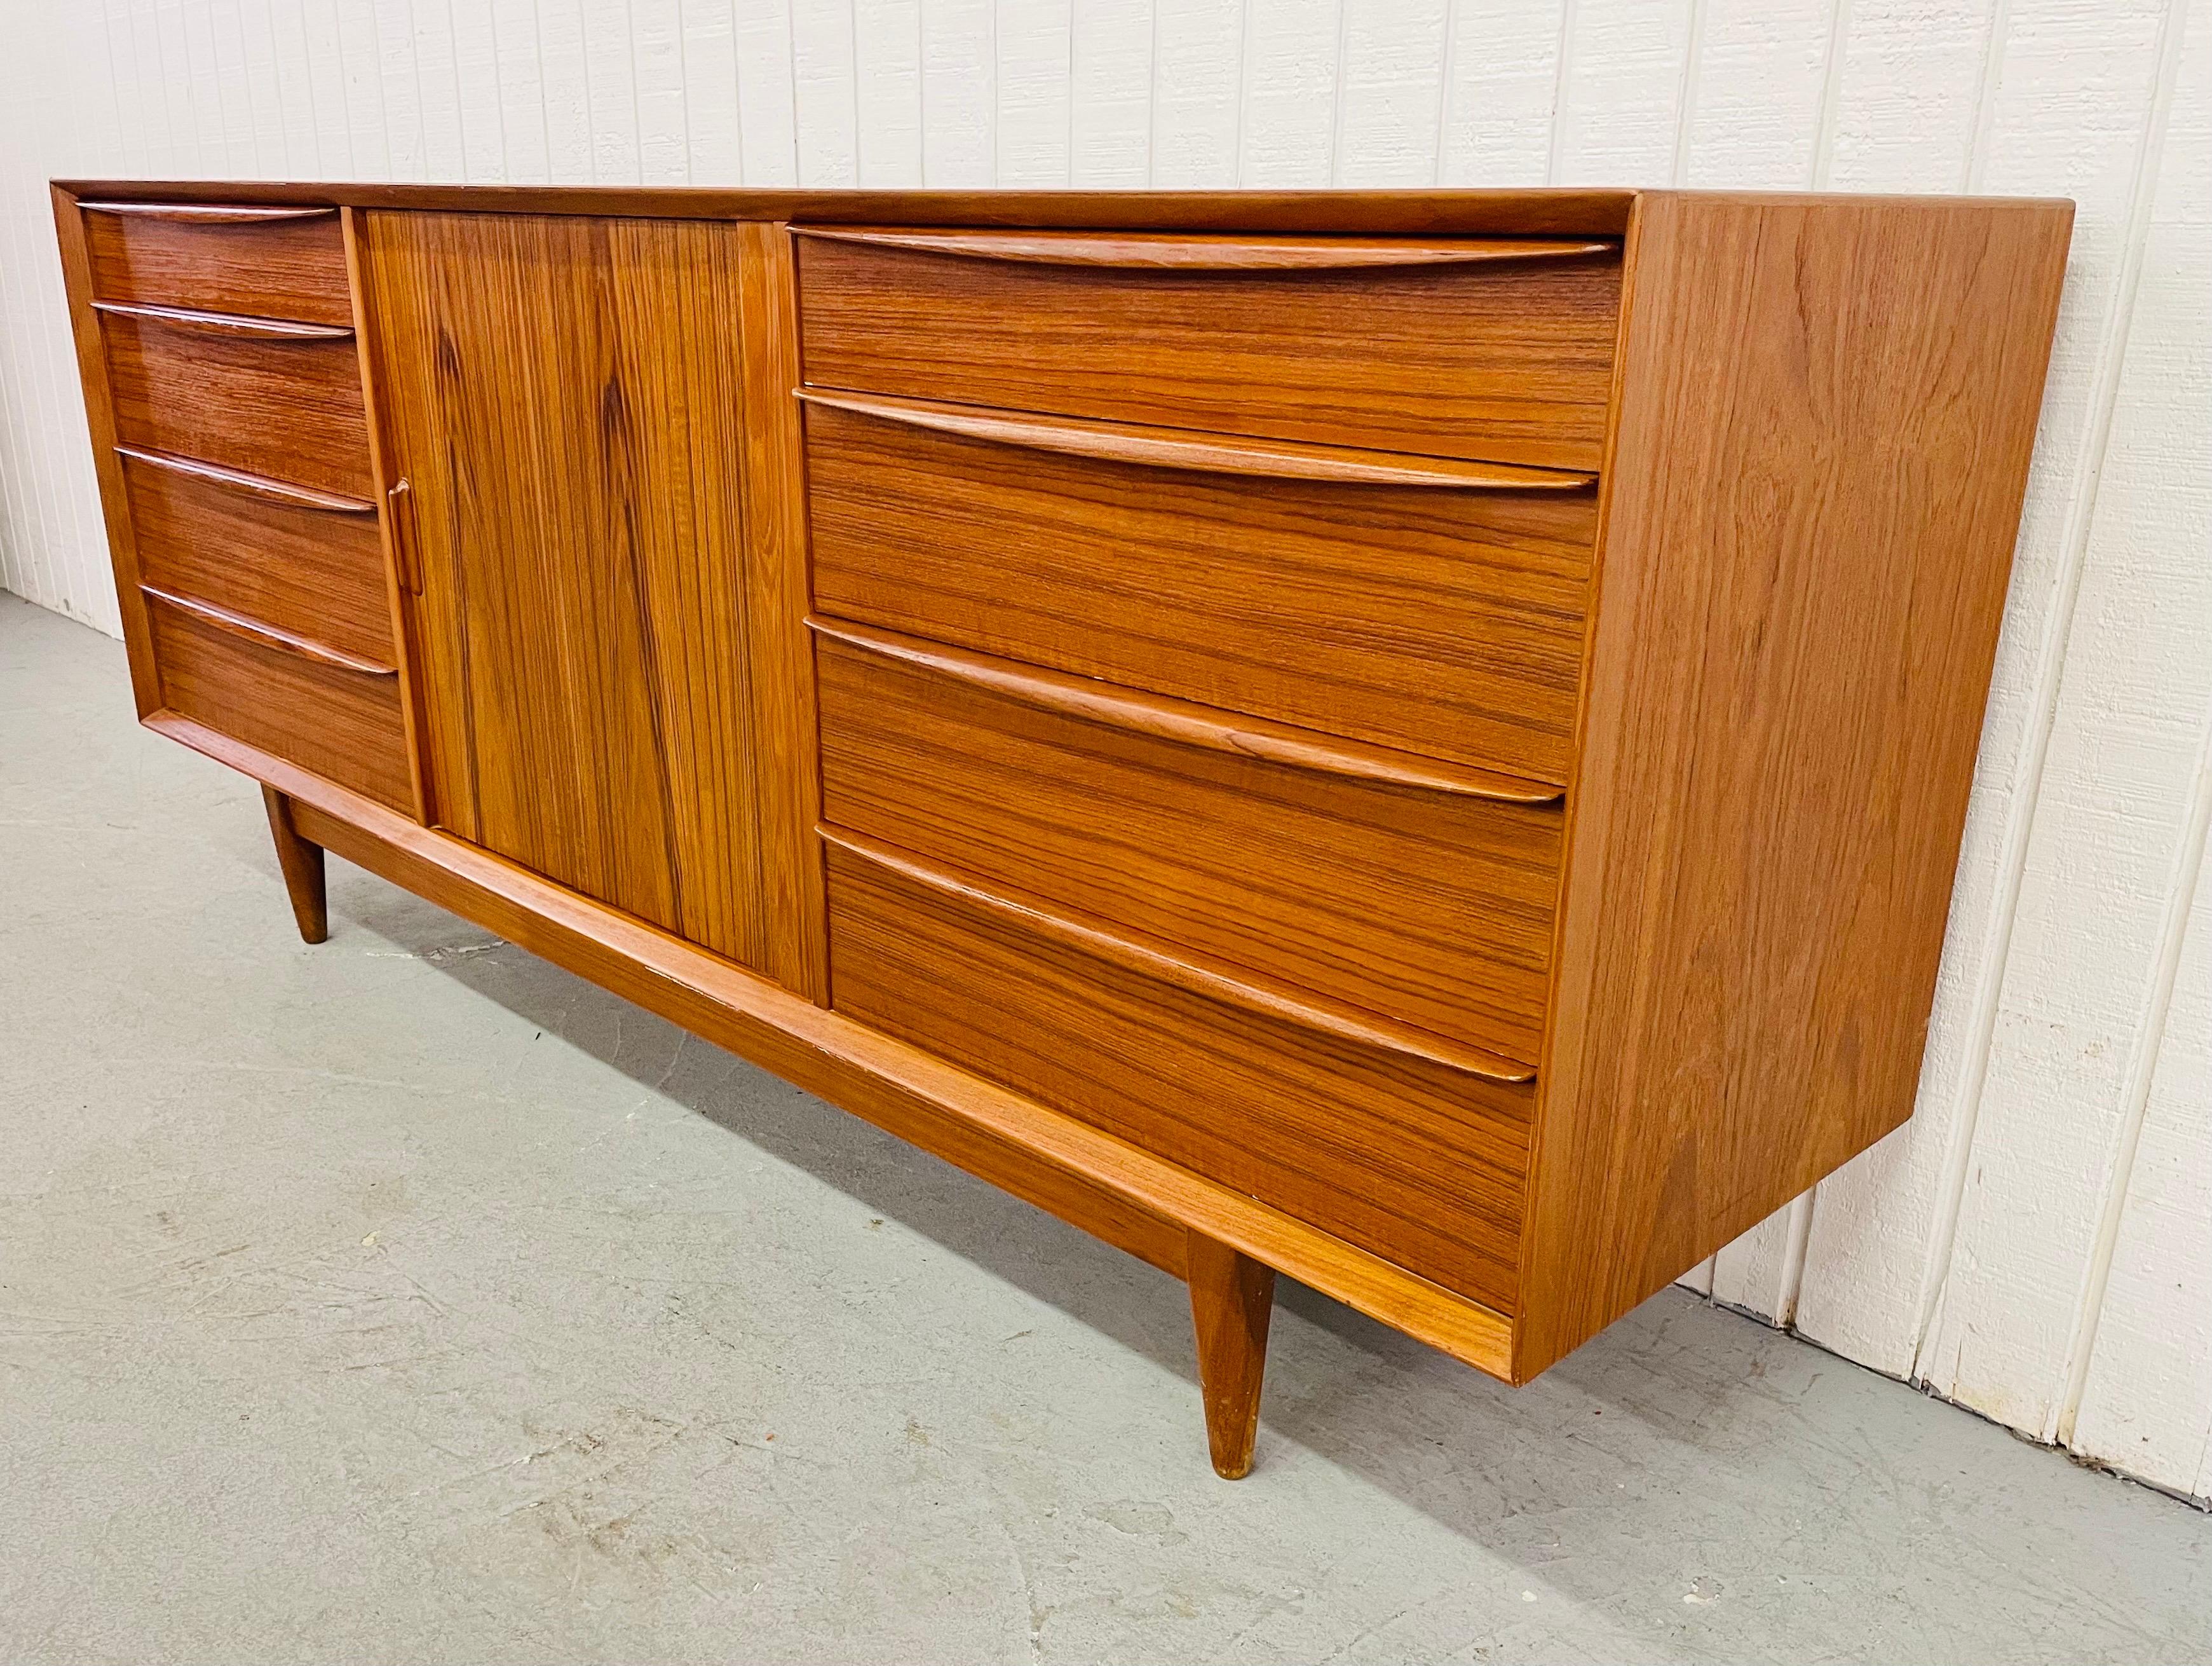 This listing is for an exceptional Mid-Century Danish Modern Falster Teak Tambour Dresser. Featuring four drawers on the left, four drawers on the right, a tambour sliding center door that opens up to five hidden drawers, and a beautiful teak finish.